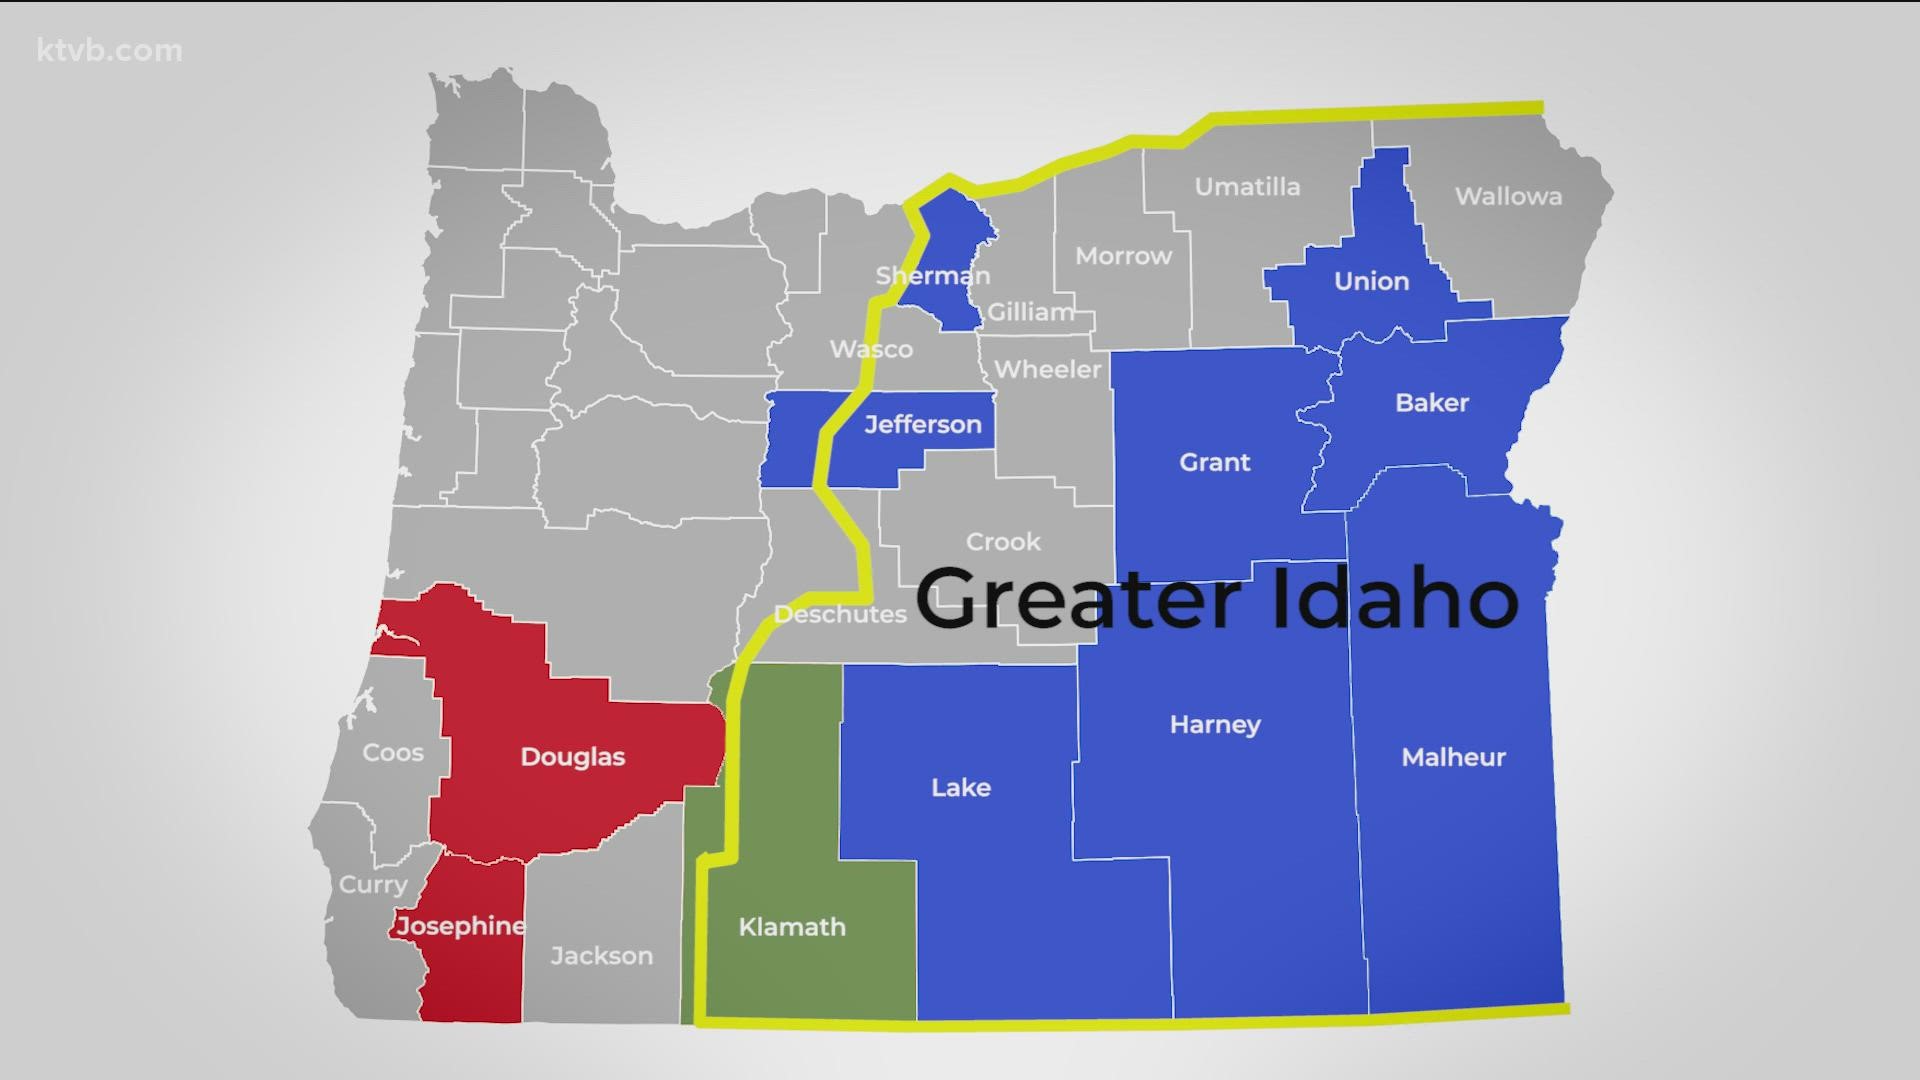 On Tuesday, voters in three Oregon counties had an initiative on their ballot to become part of ‘Greater Idaho.’